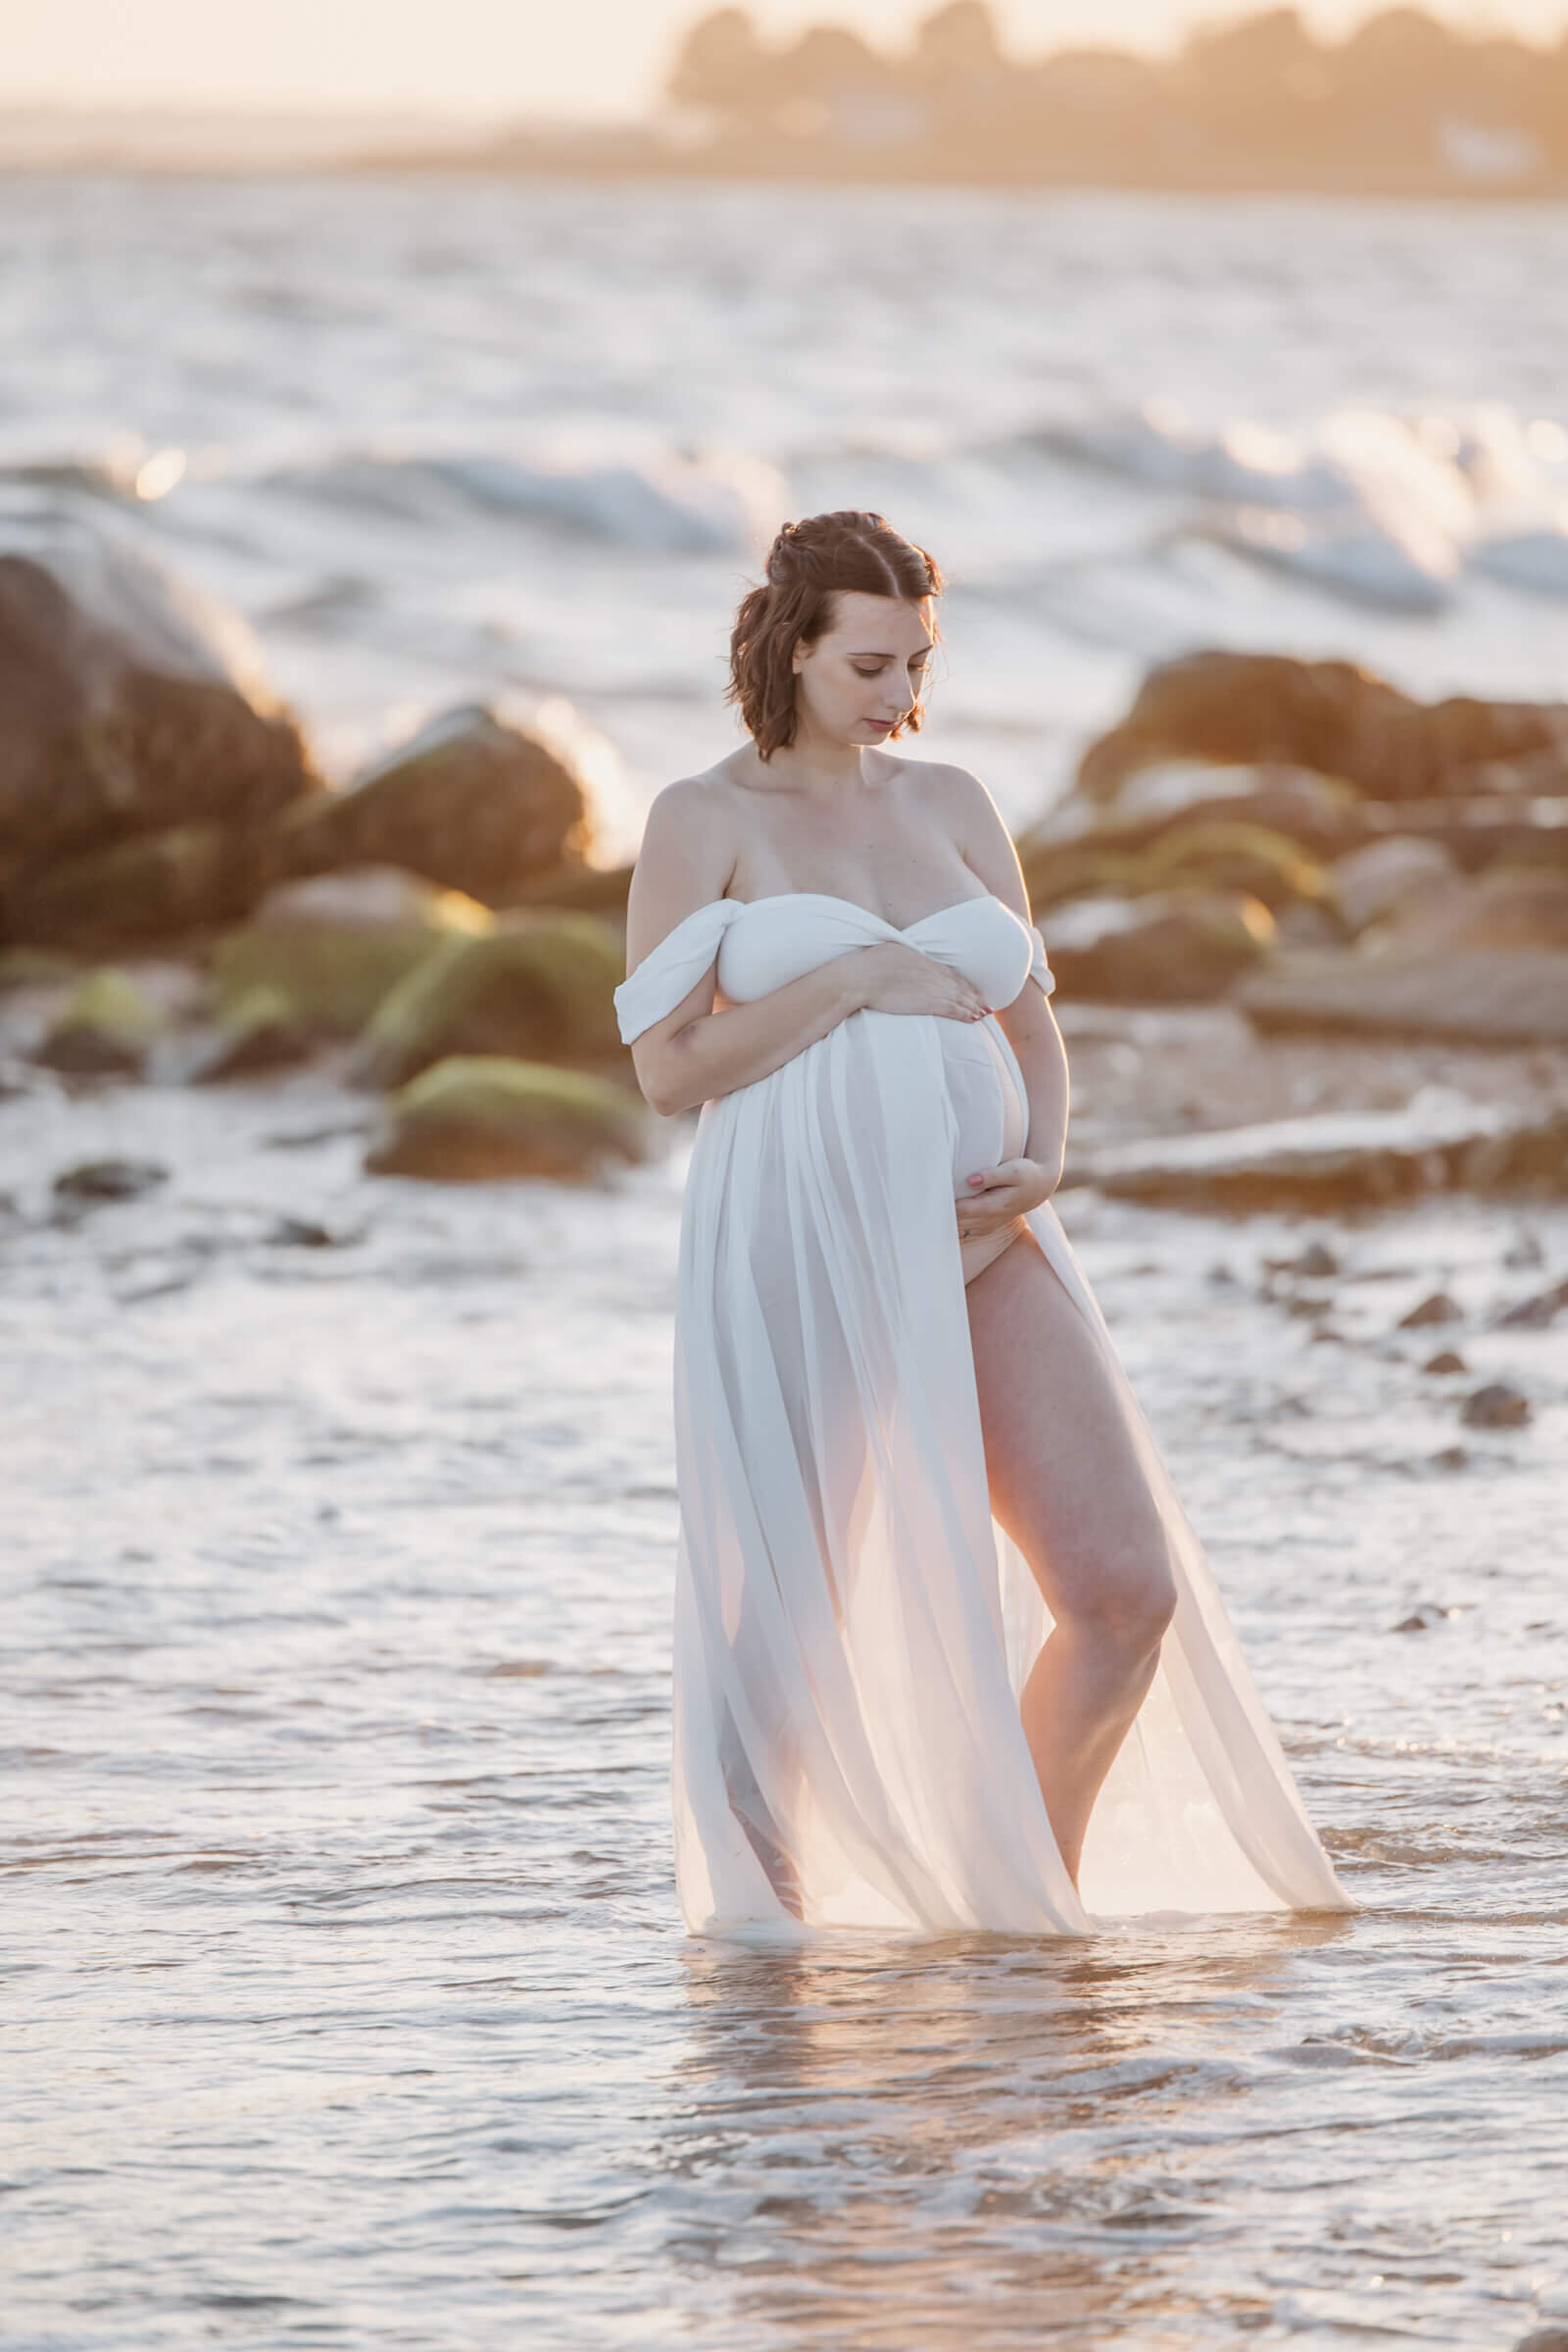 Pregnant woman in open dress at sunset in shallow water